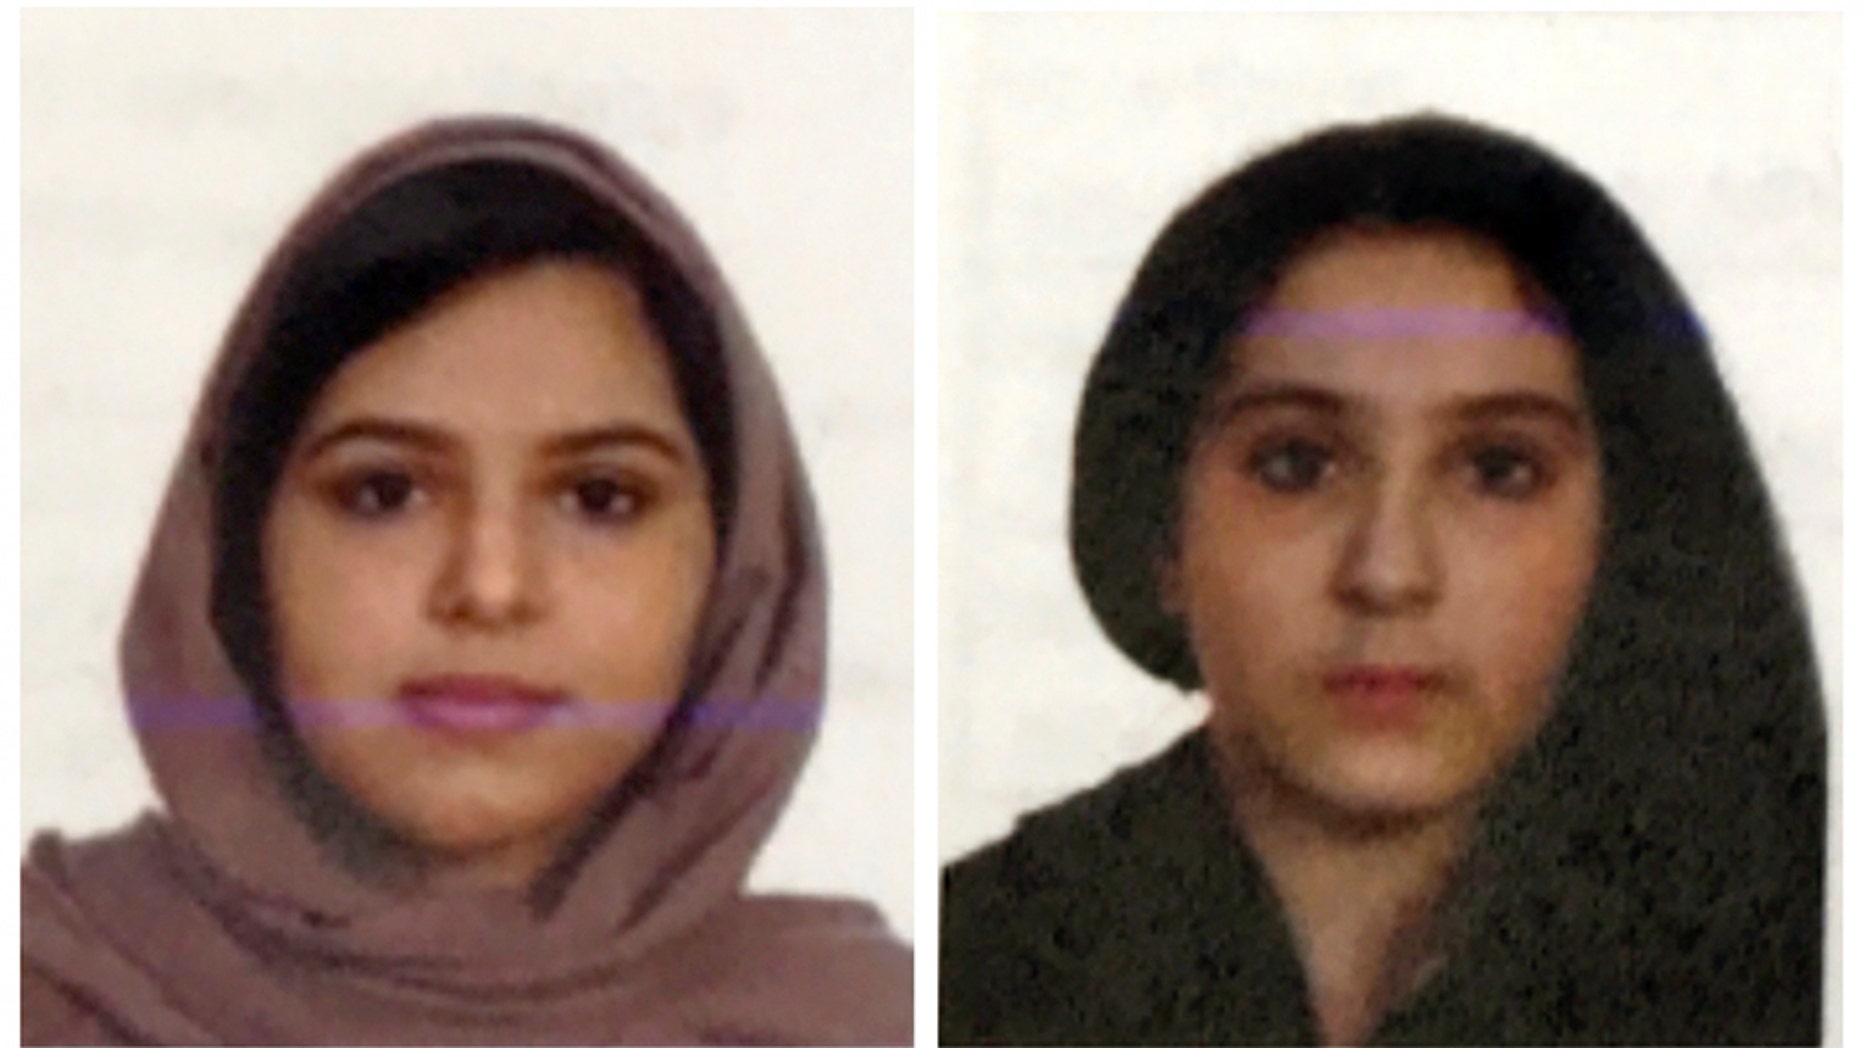 Cause of death released for Saudi sisters found in Hudson River